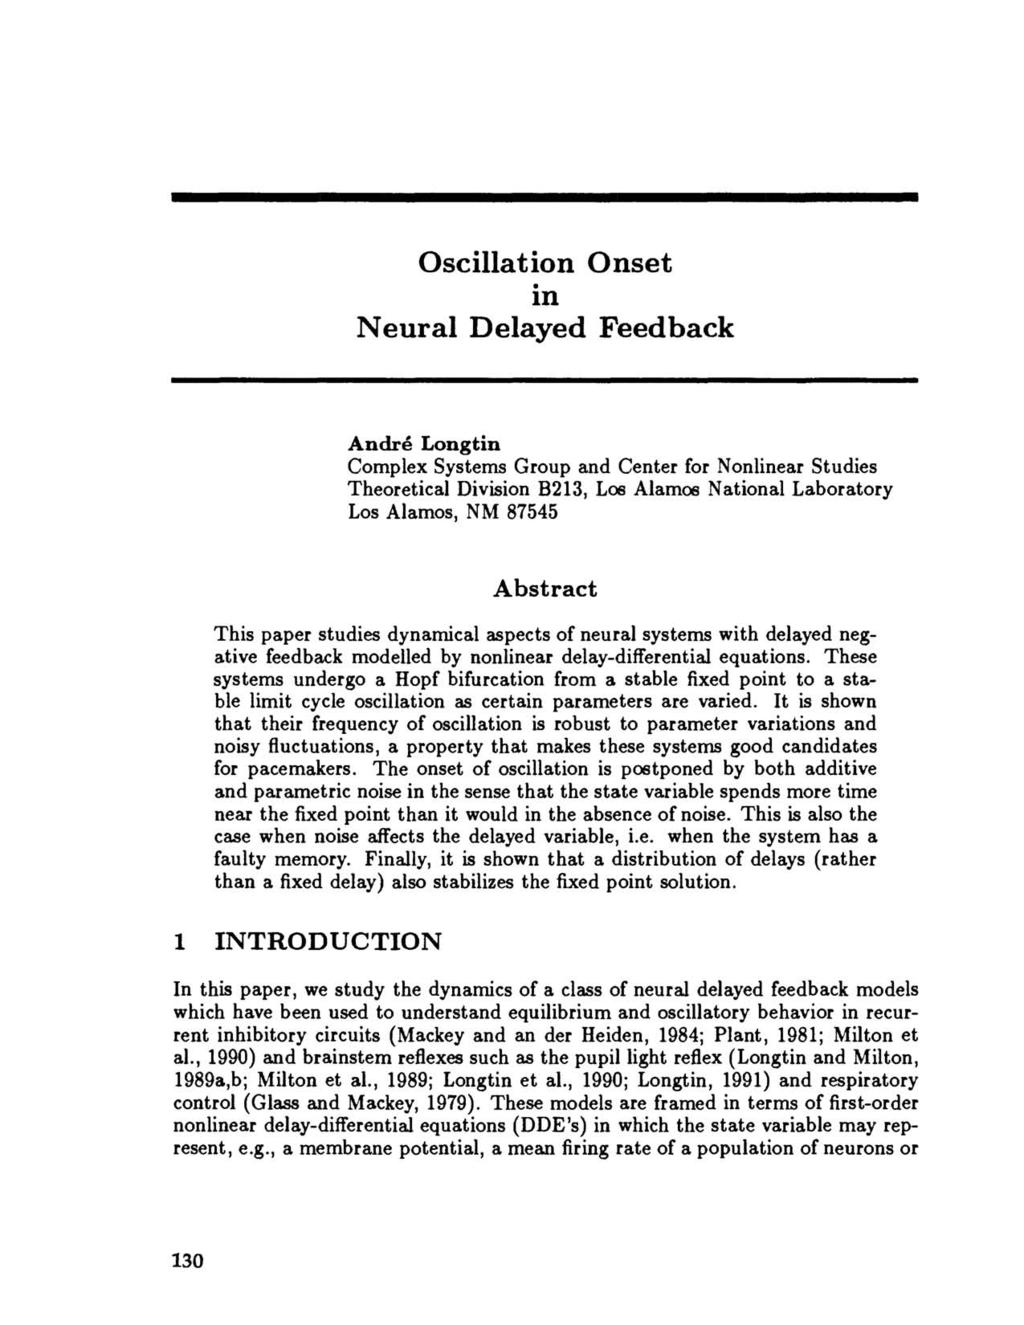 Oscillation Onset In Neural Delayed Feedback Andre Longtin Complex Systems Group and Center for Nonlinear Studies Theoretical Division B213, Los Alamos National Laboratory Los Alamos, NM 87545